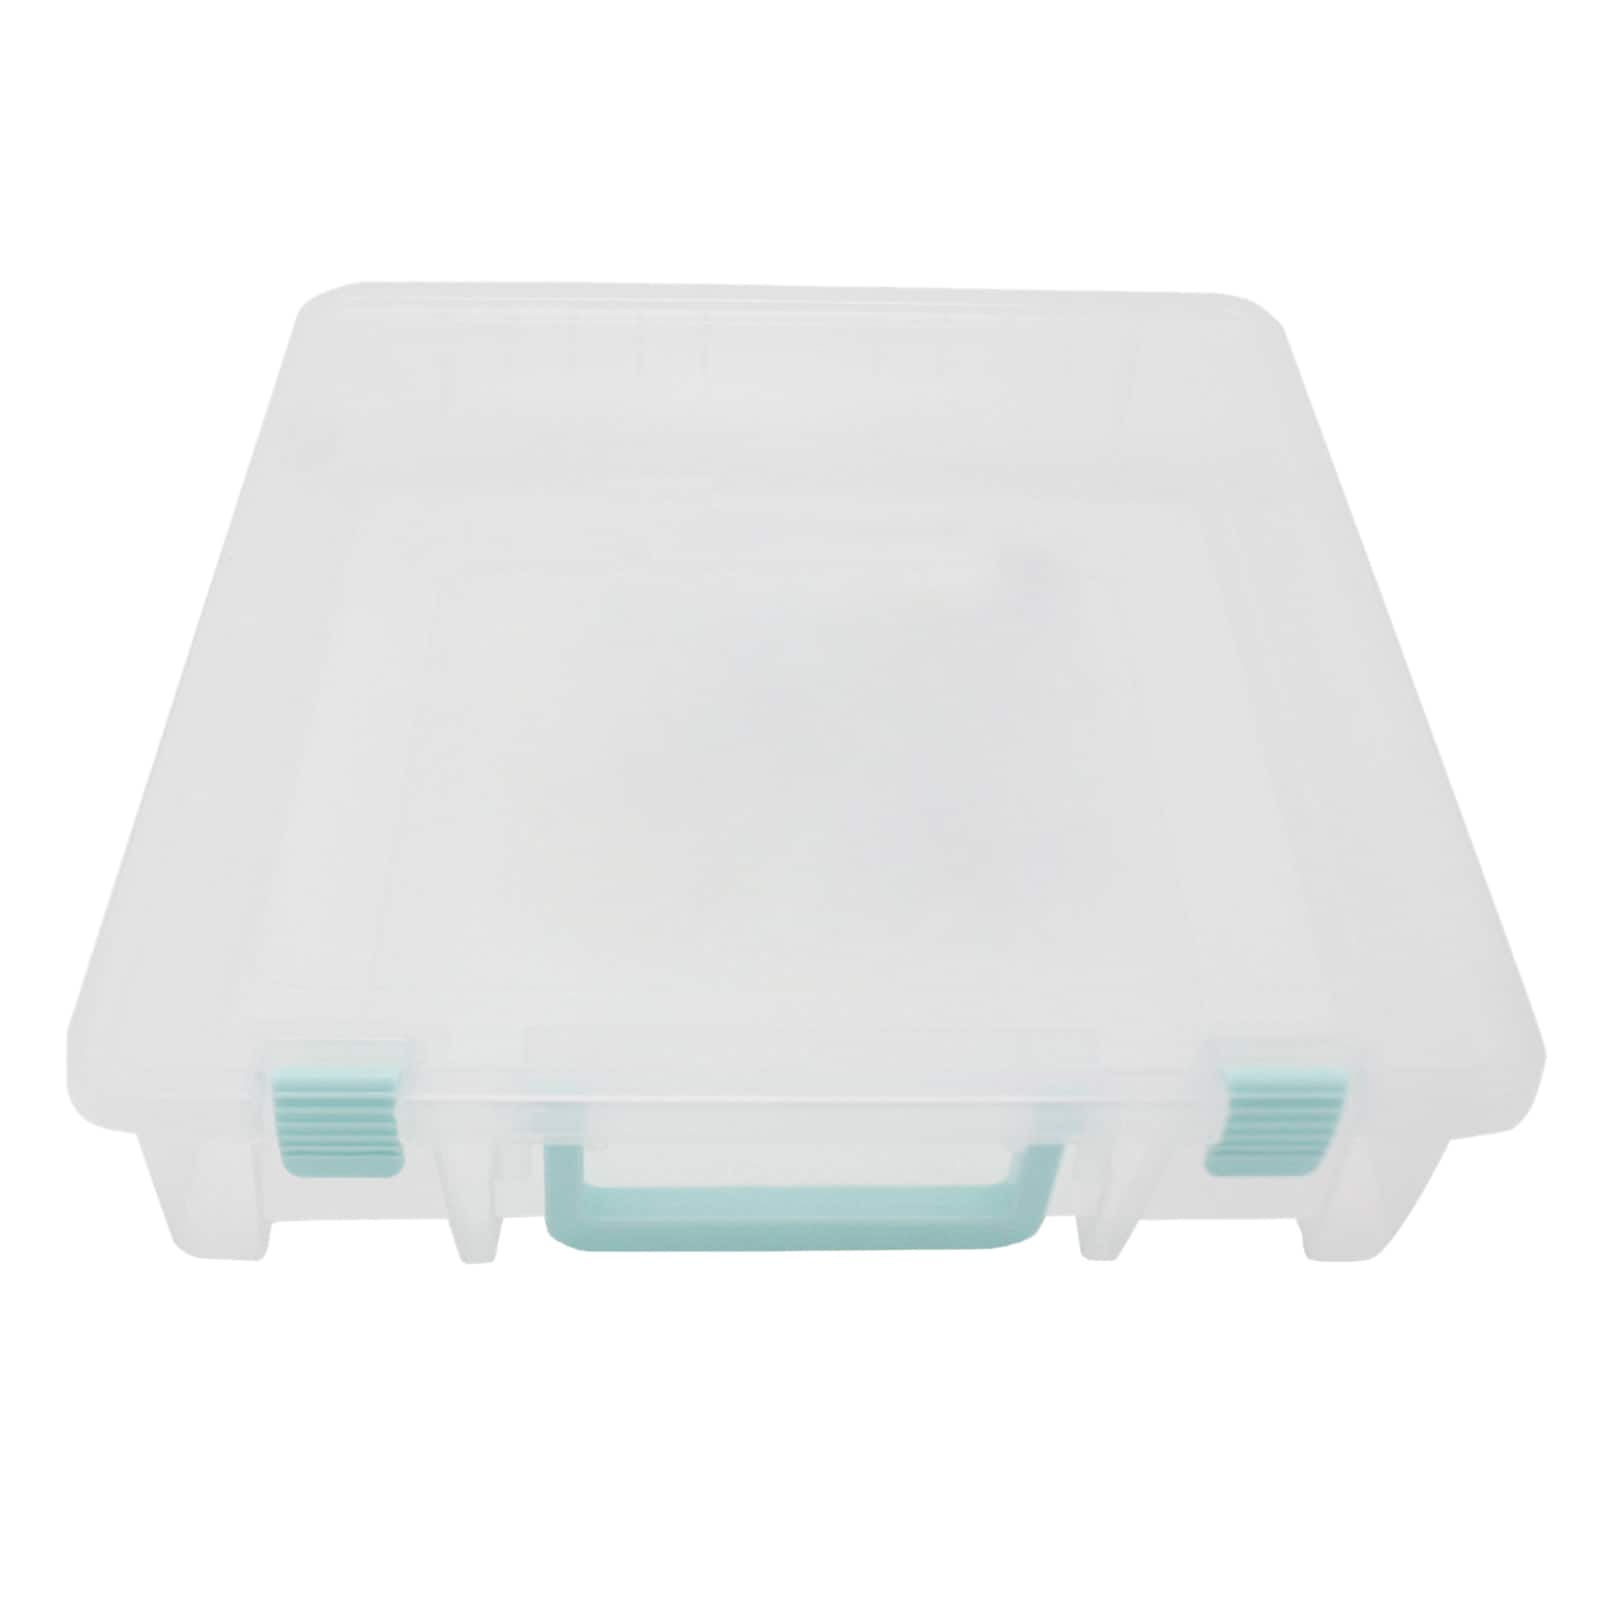 12 x 12 Plastic Scrapbook Storage Case by Simply Tidy - Portable Case for Documents, Papers, Sewing, Crafts - Clear, Bulk 12 Pack, Size: 14.1” x 14.3”